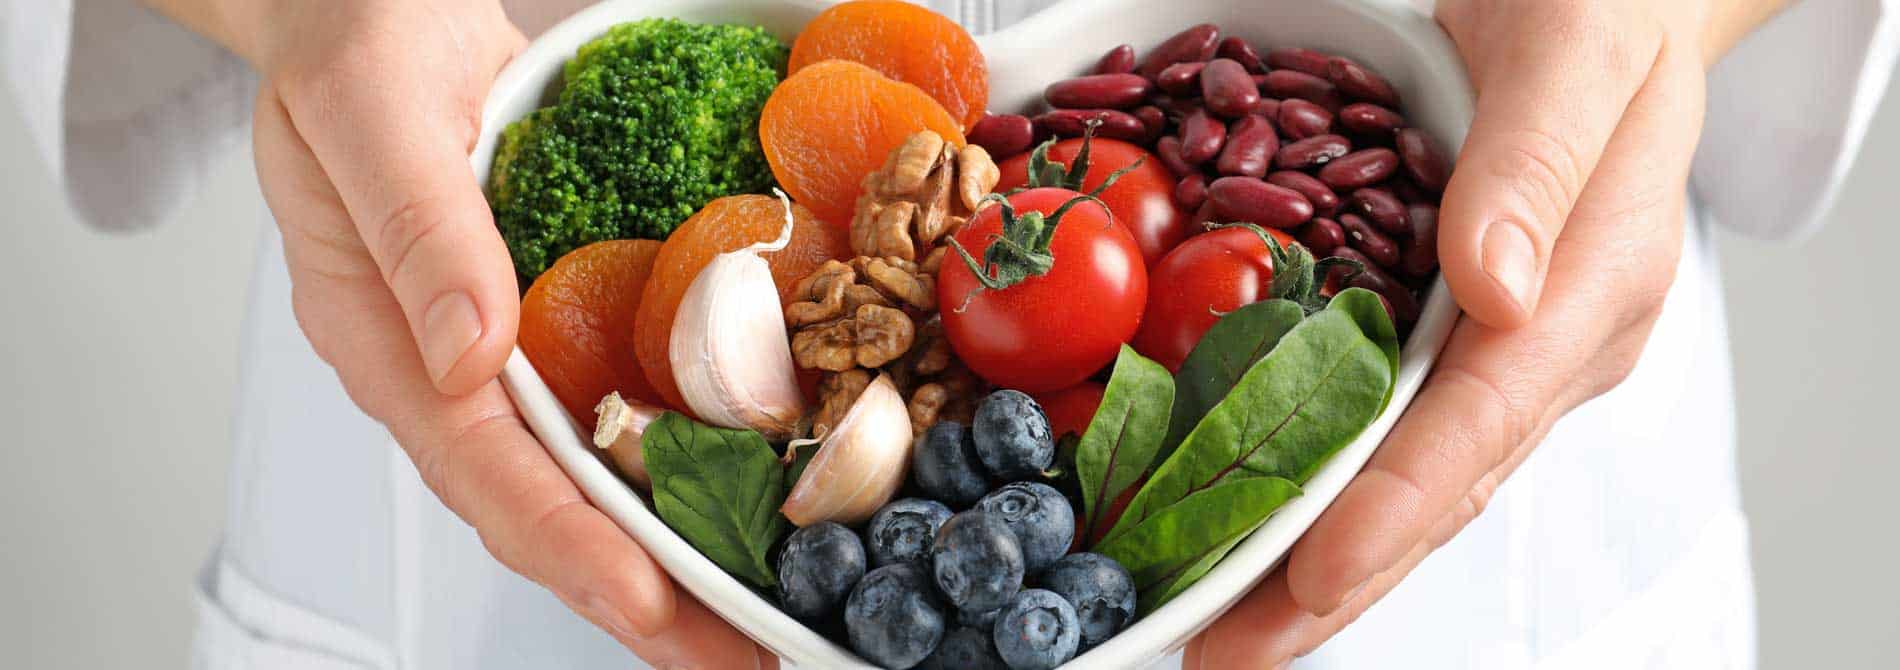 bowl of healthy fruits and vegetables